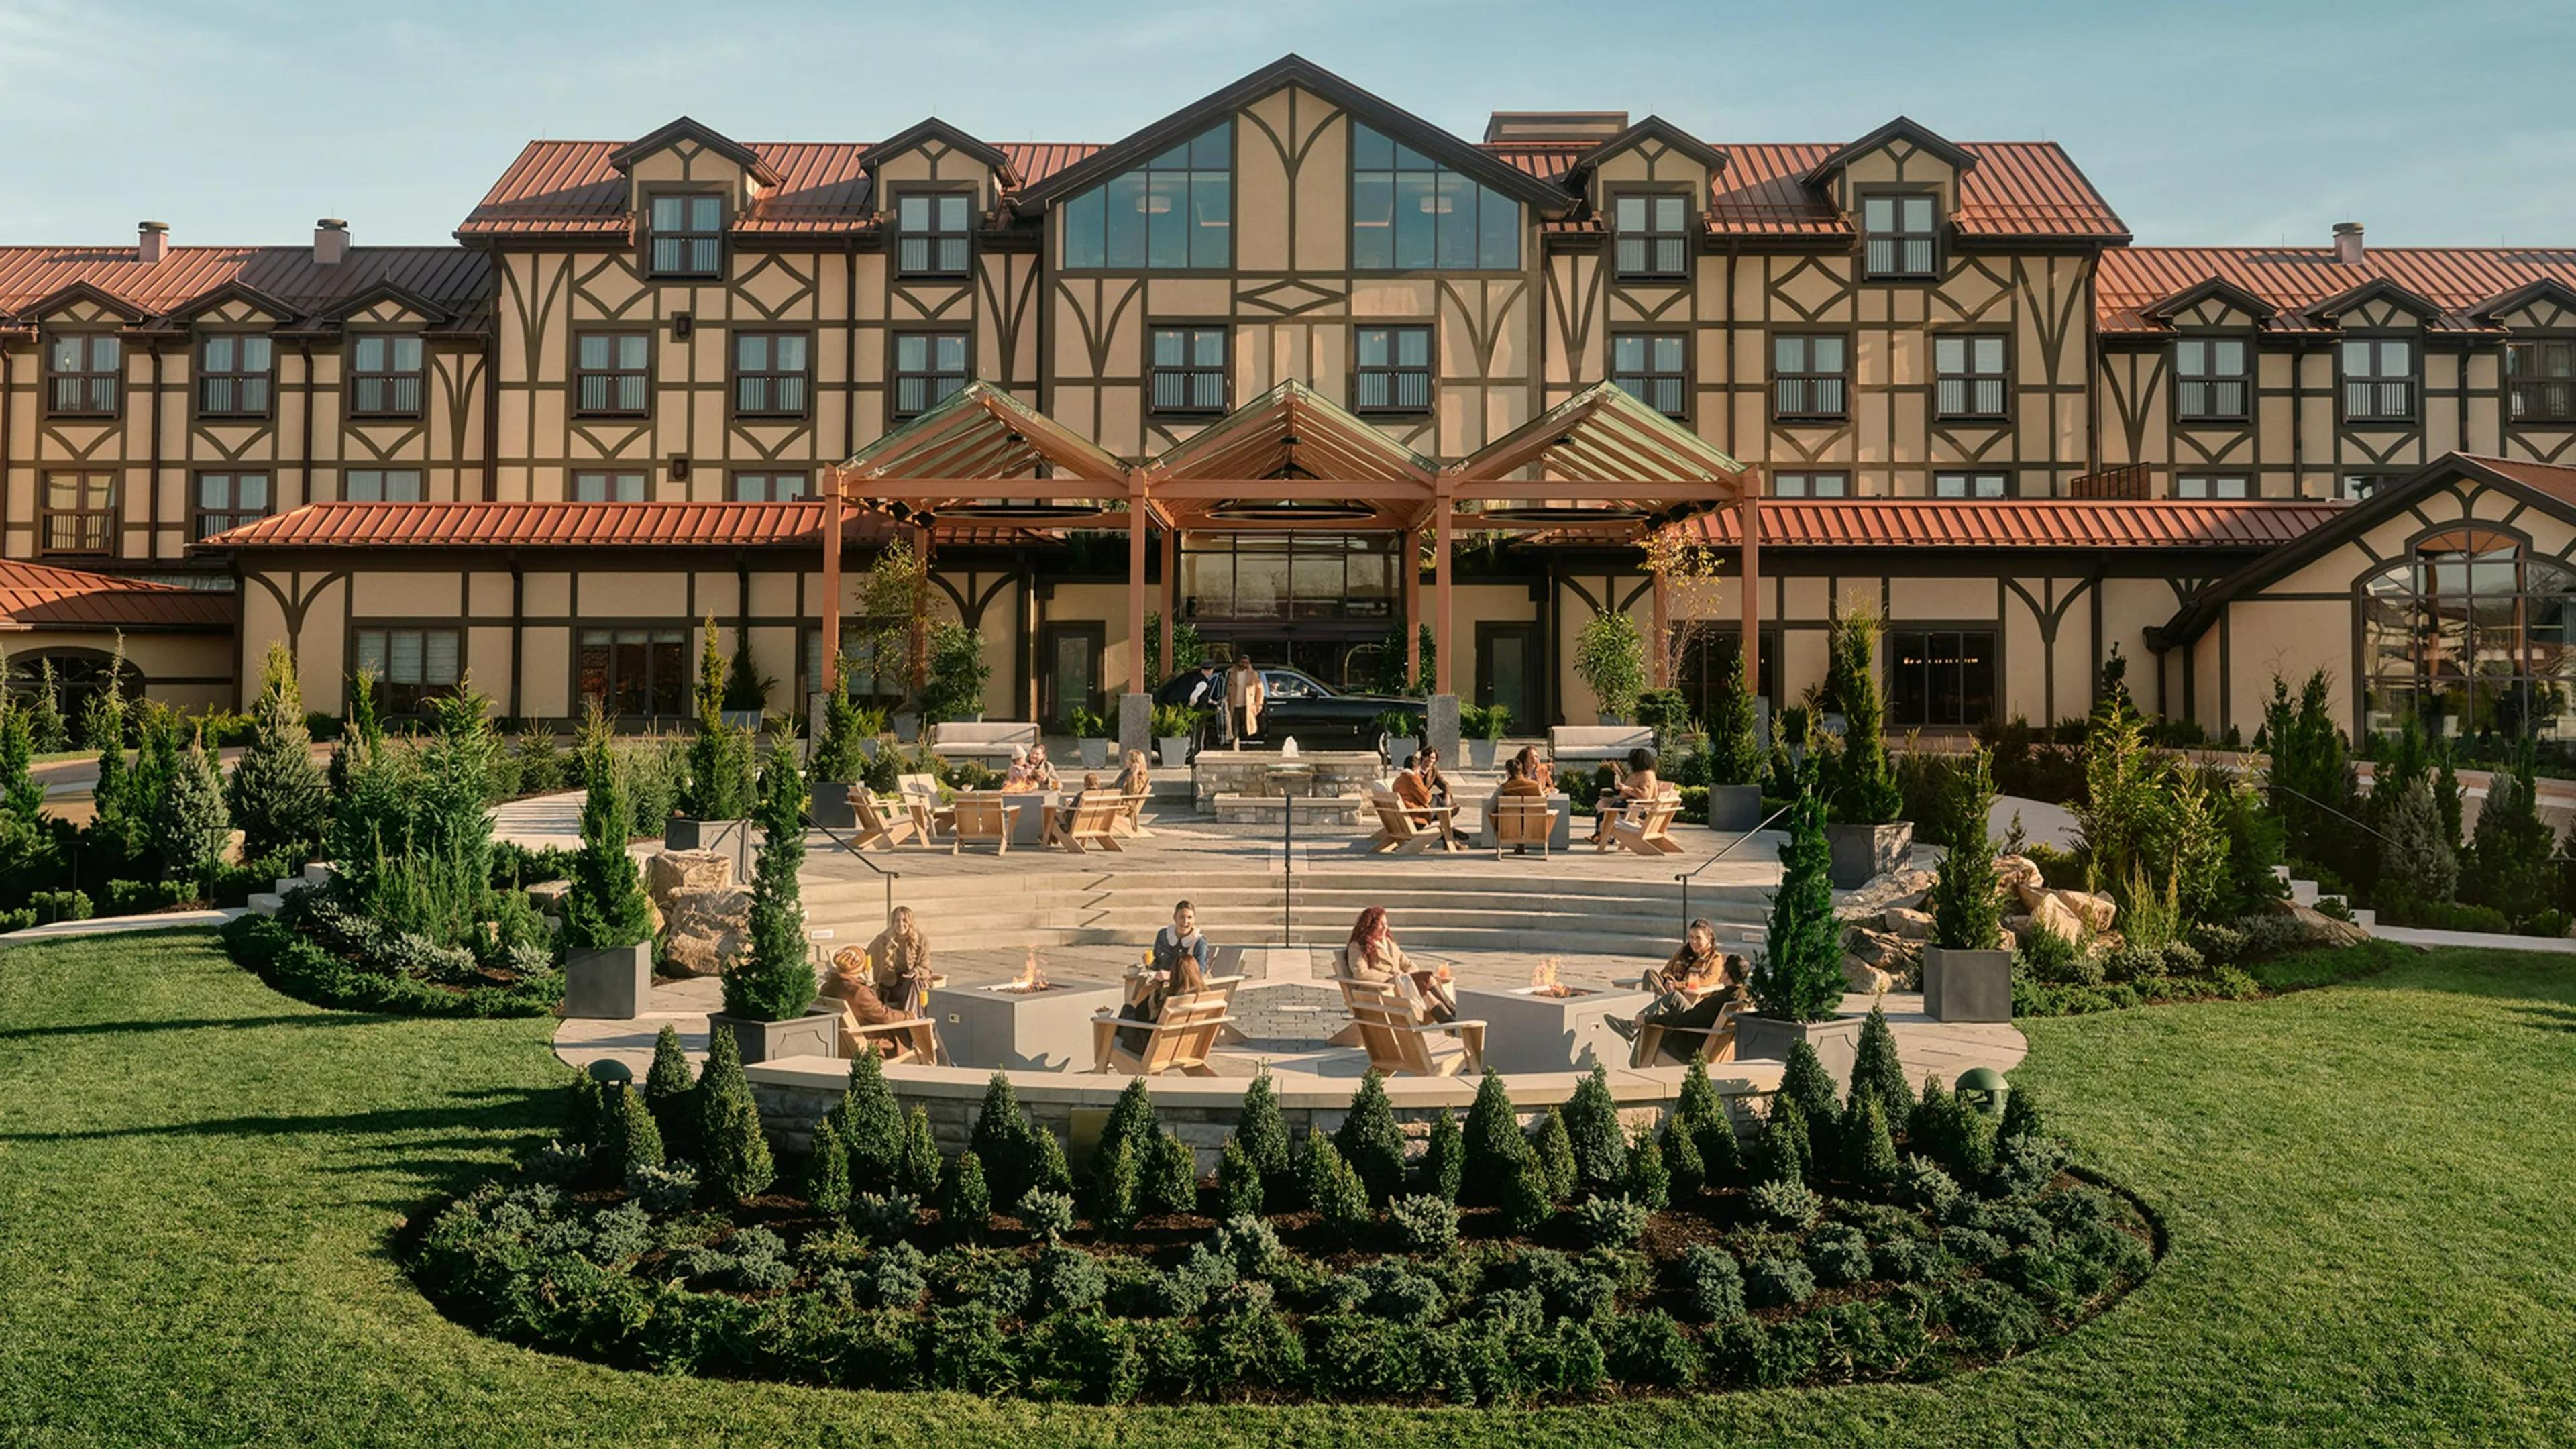 The Grand Lodge at Nemacolin